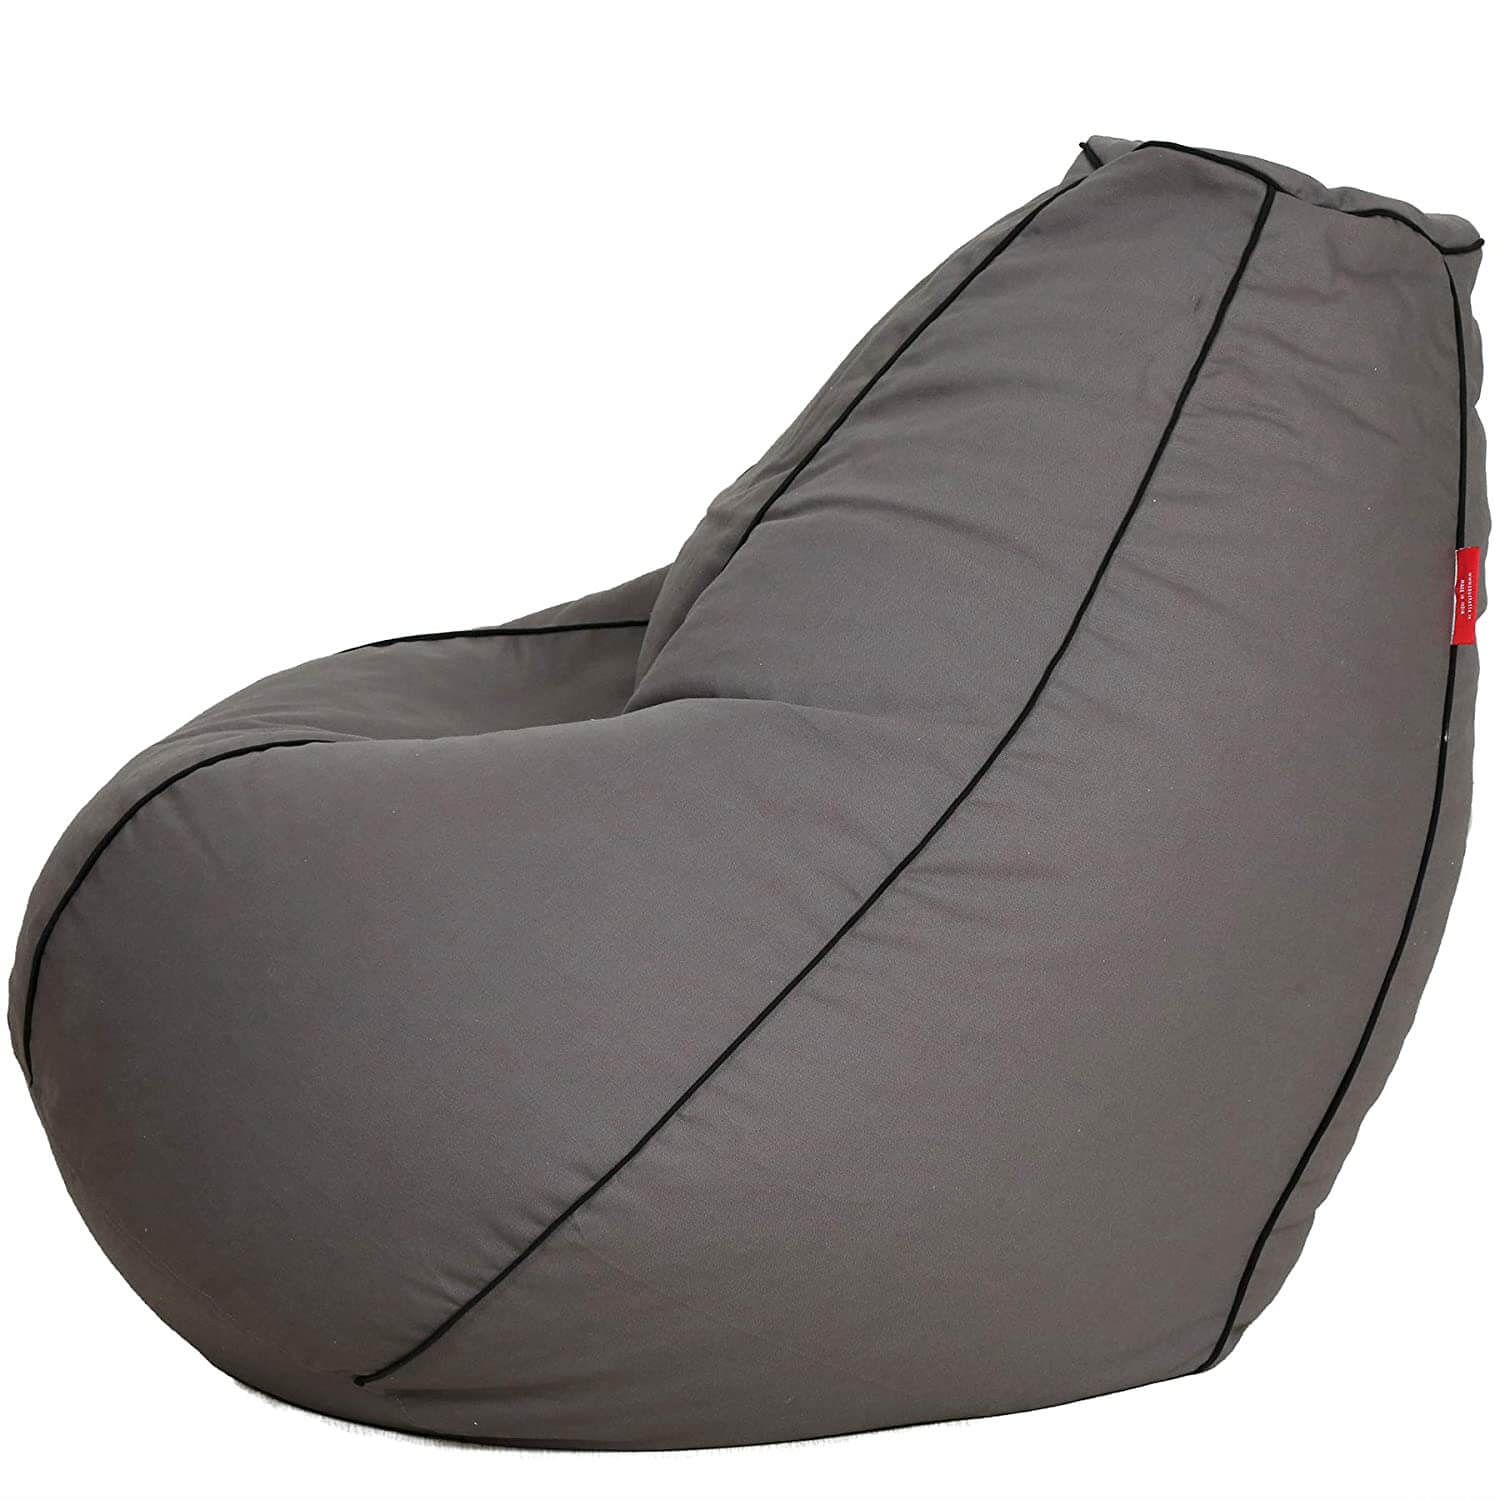 Buy Classic XXL Leatherette Bean Bag with Beans in Jet Black Colour at 35%  OFF by Sattva